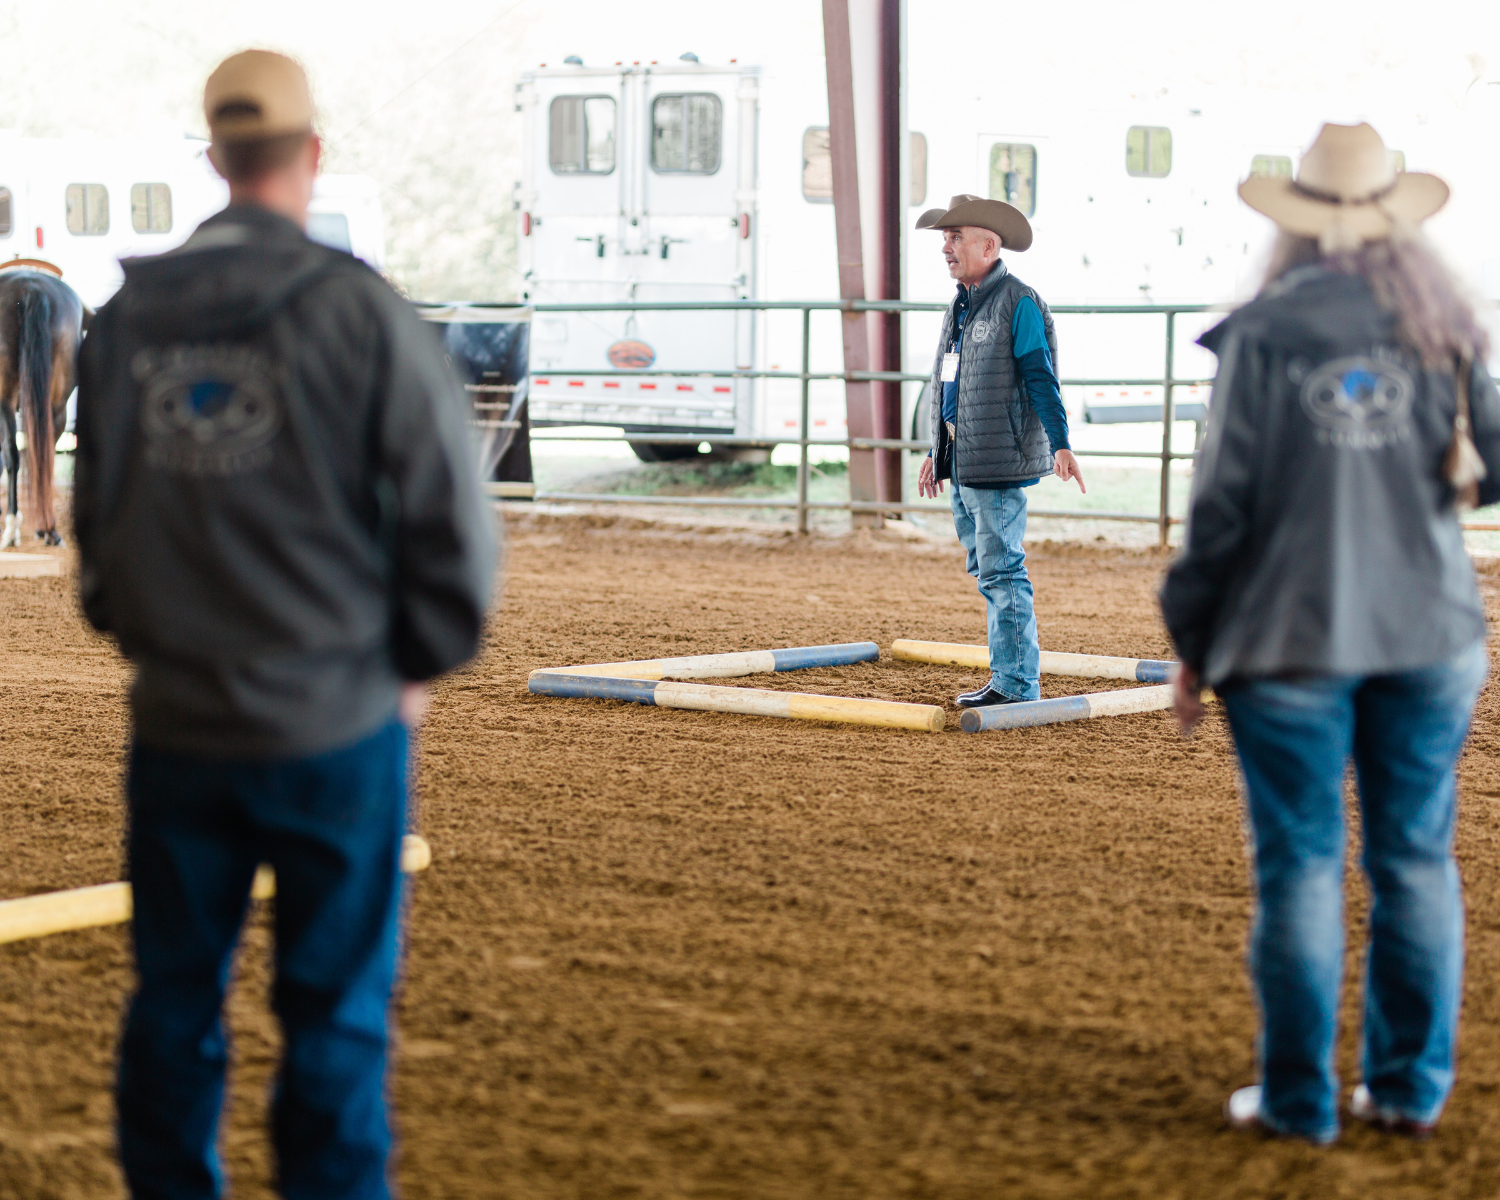 Professional horseman Stephen Stephens instructs attendees at the 2019 Coaches Summit.